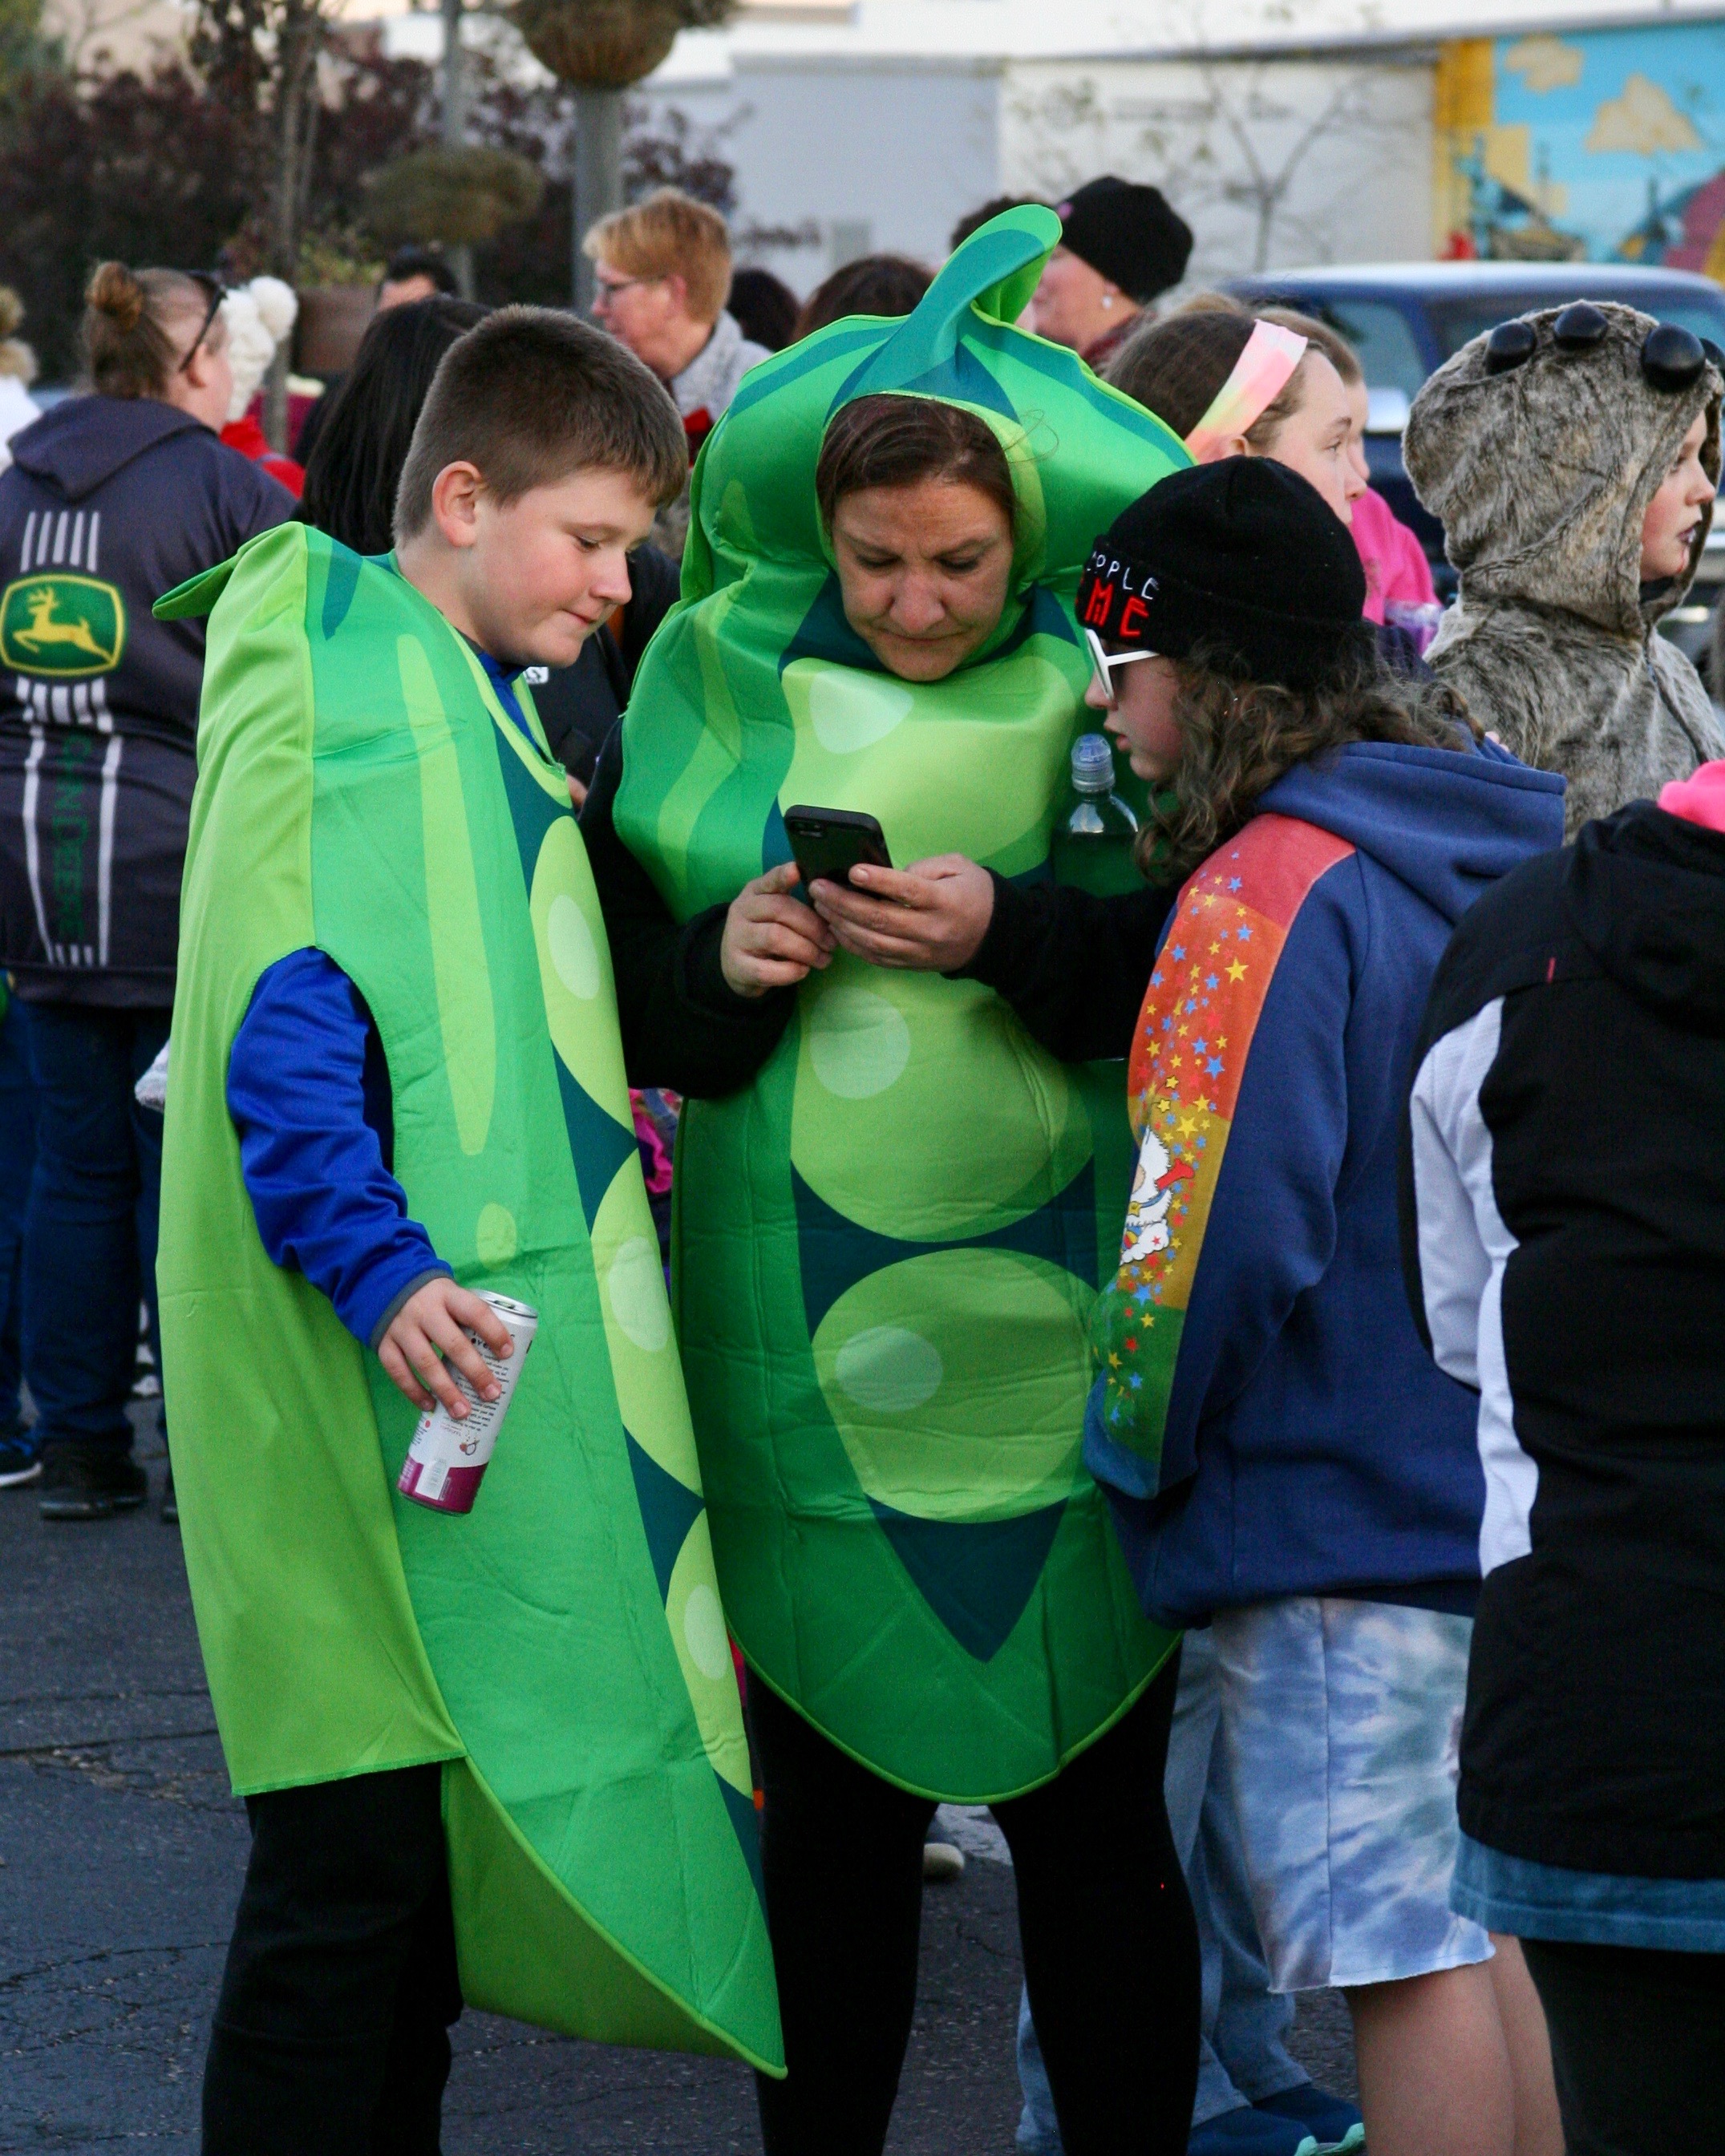 People wearing matching "peas in a pod" costumes looking at phone